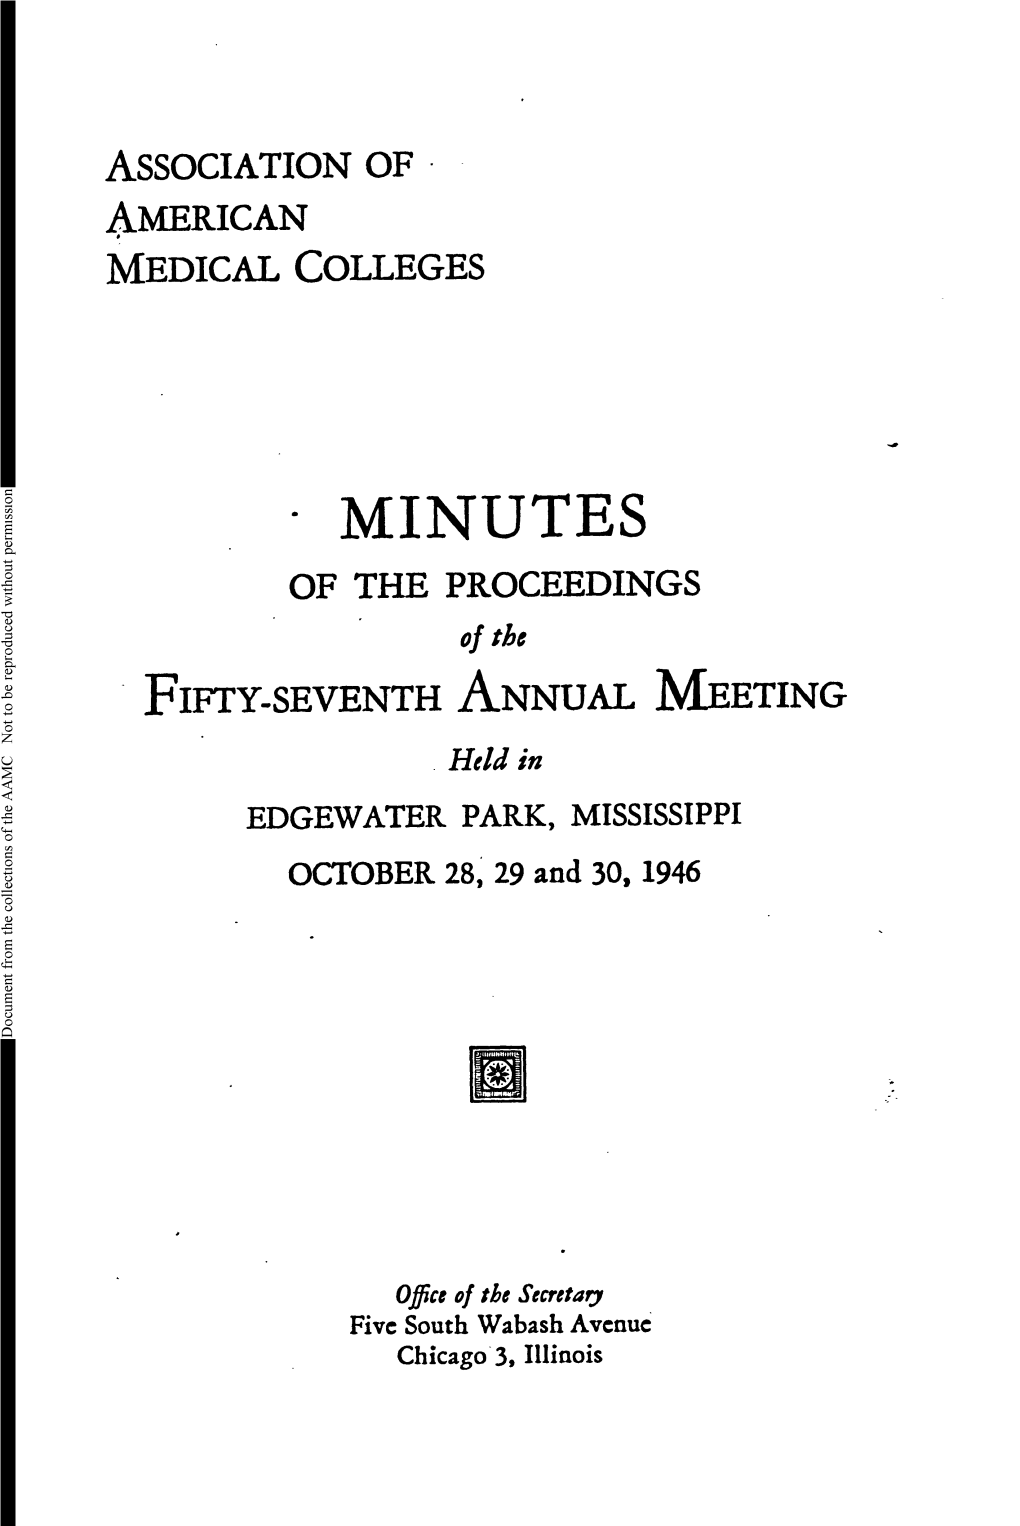 AAMC Minutes of the Proceedings of the Fifty-Seventh Annual Meeting